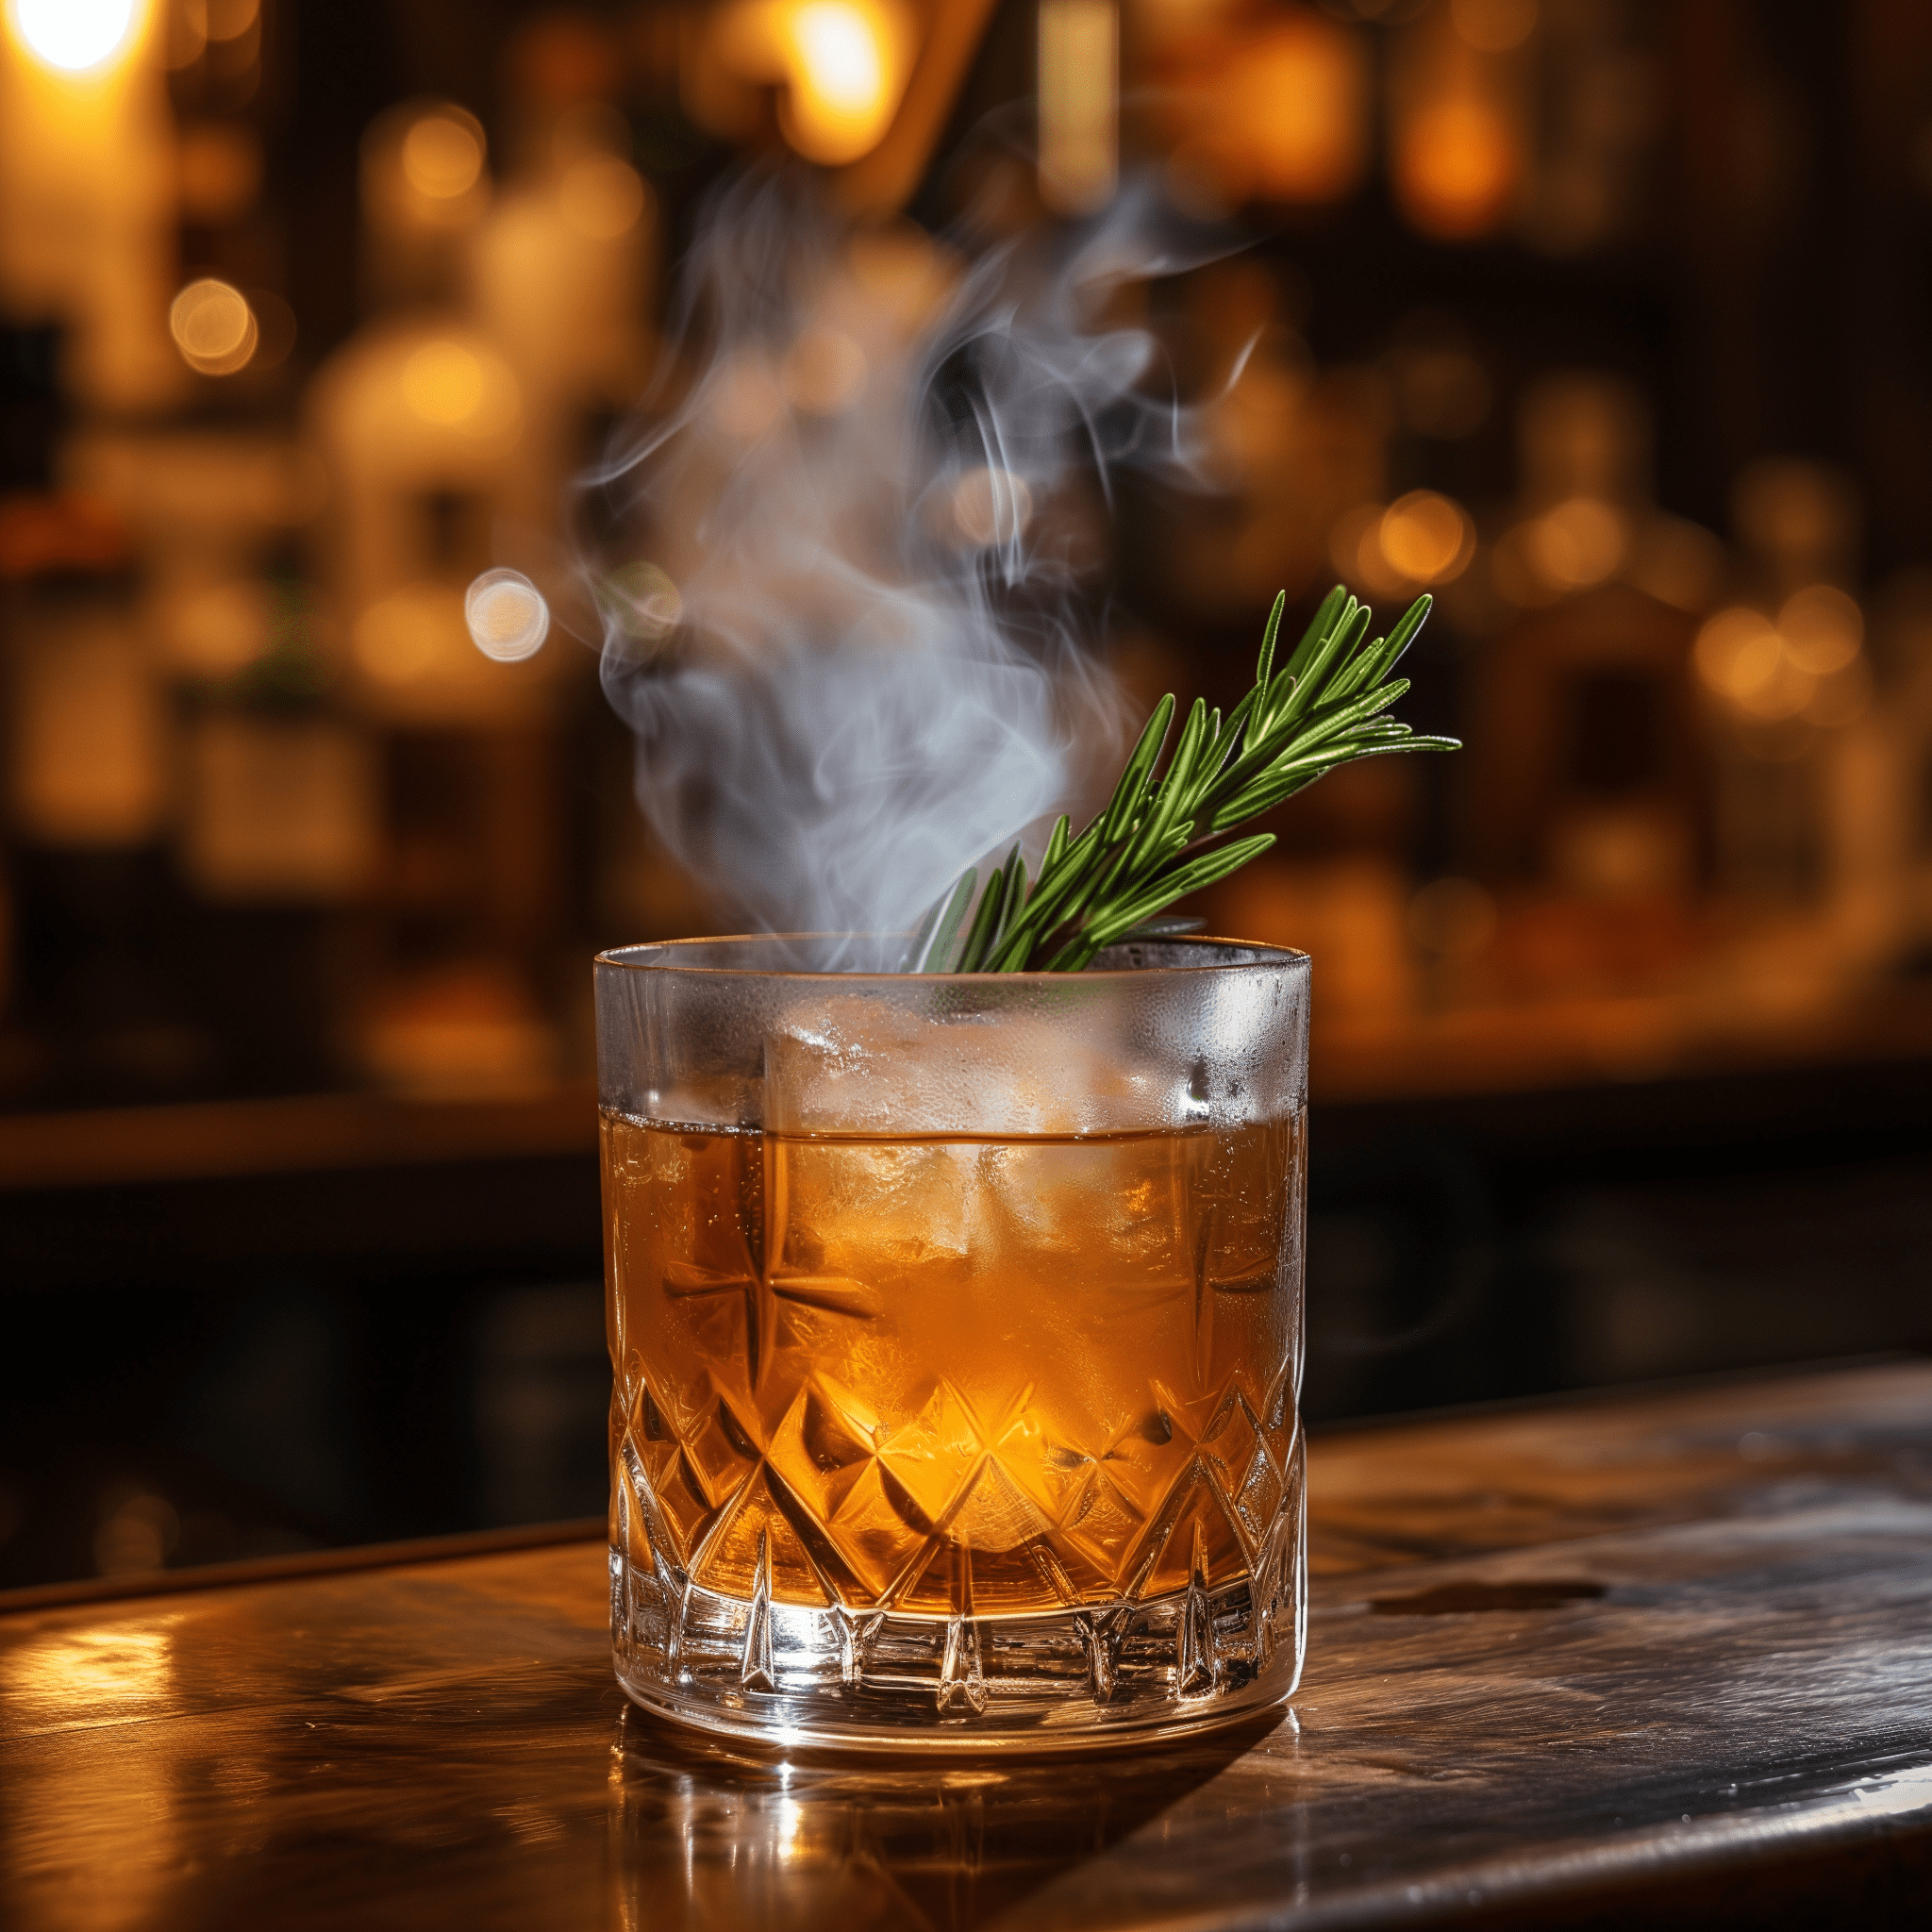 Highlander Cocktail Recipe - The Highlander cocktail offers a robust and smoky flavor profile with an underlying sweetness. The scotch provides a warm, earthy base, while the mezcal introduces a subtle smokiness. The simple syrup balances the strength of the spirits, and the rosemary adds a hint of herbal freshness.